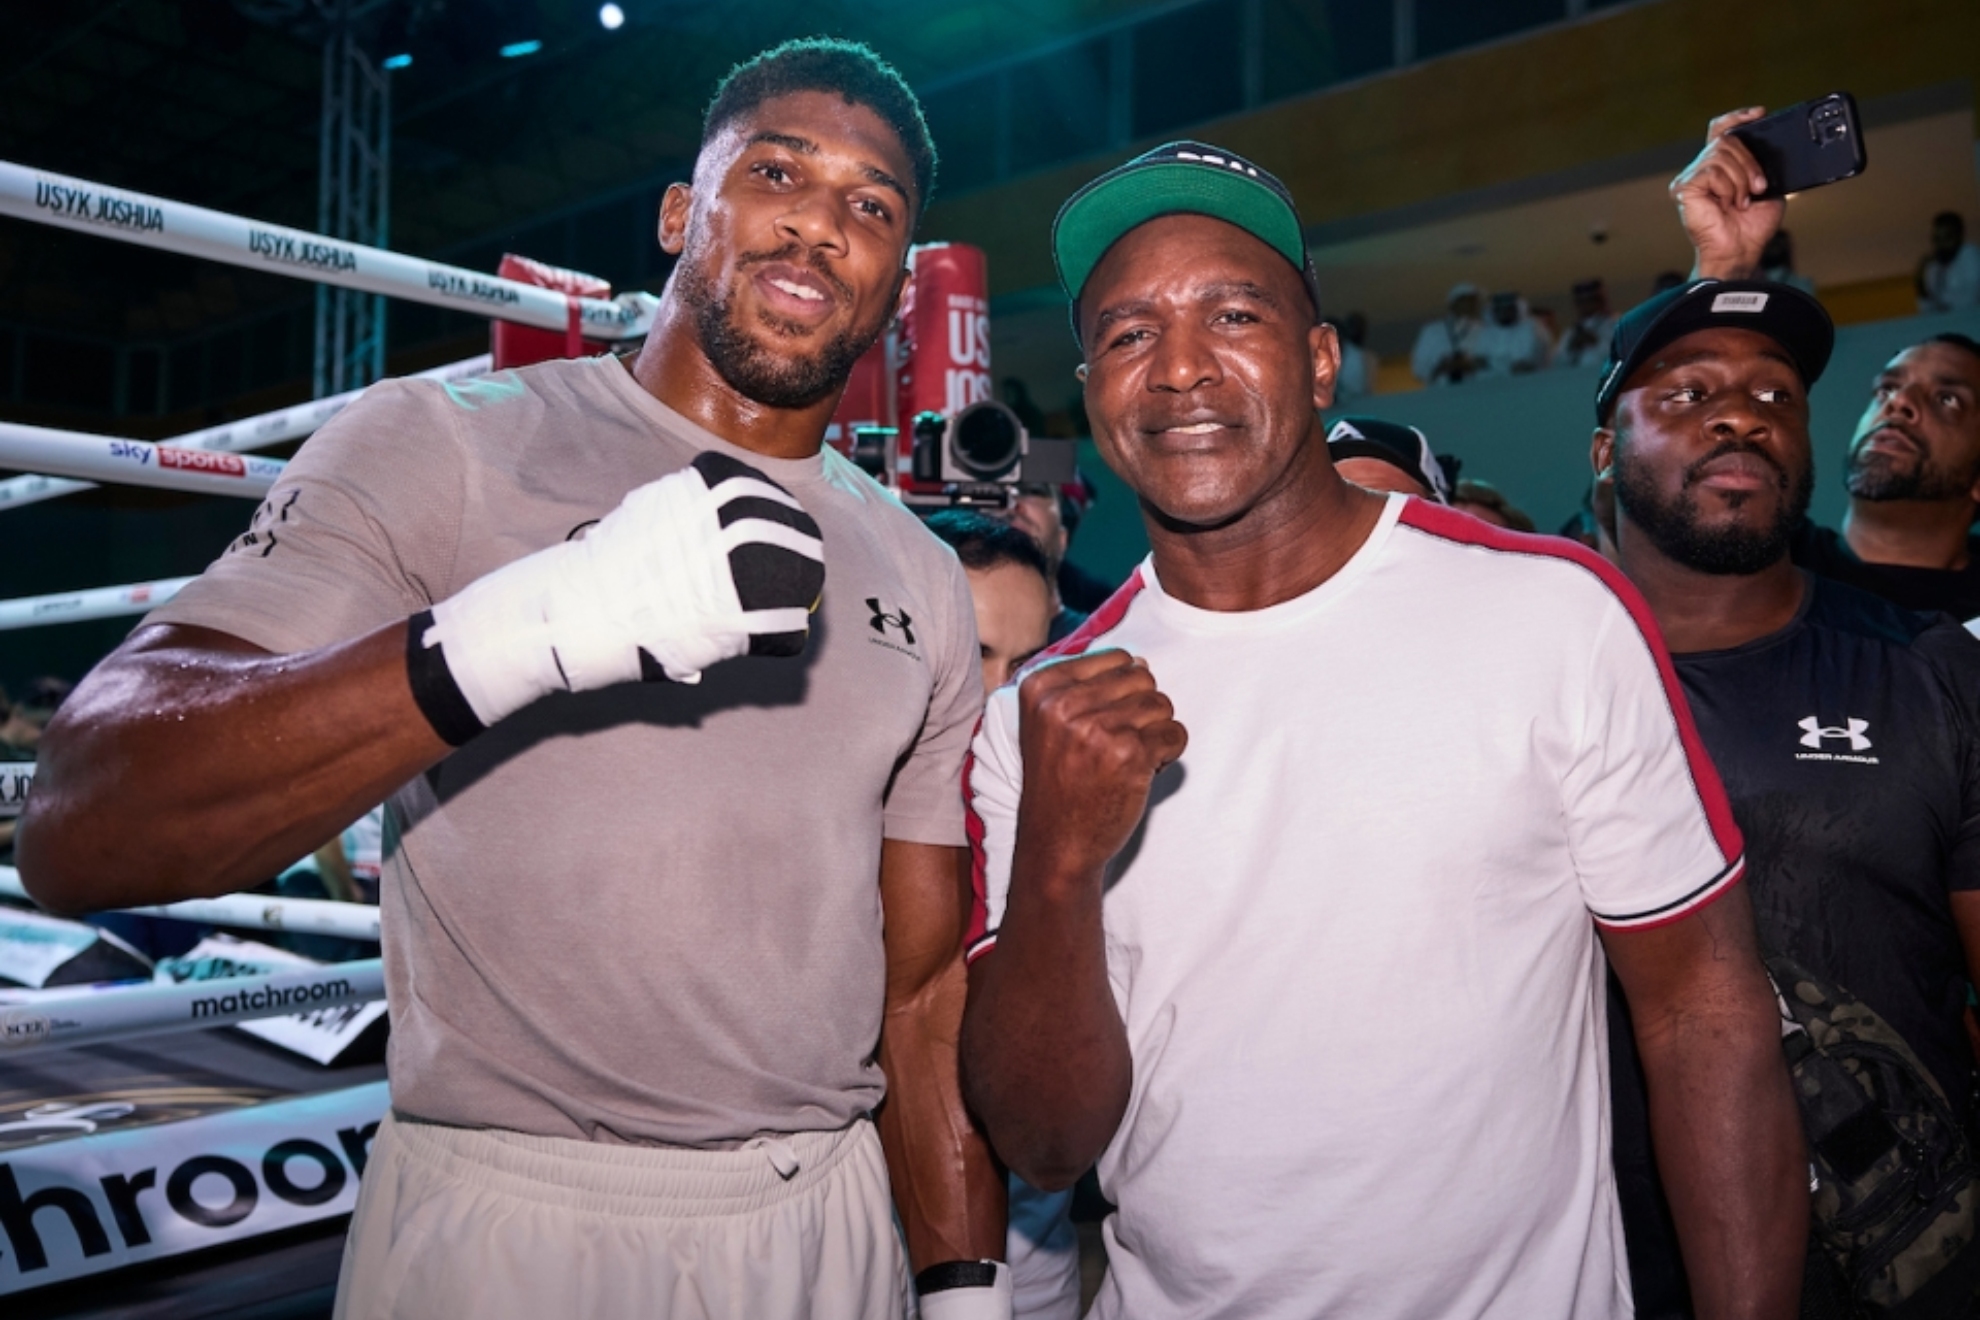 Anthony Joshua: UK Boxing Star Advised to Throw More Punched by the Champion Who Beat Mike Tyson- ‘You Have to Use Your Size'